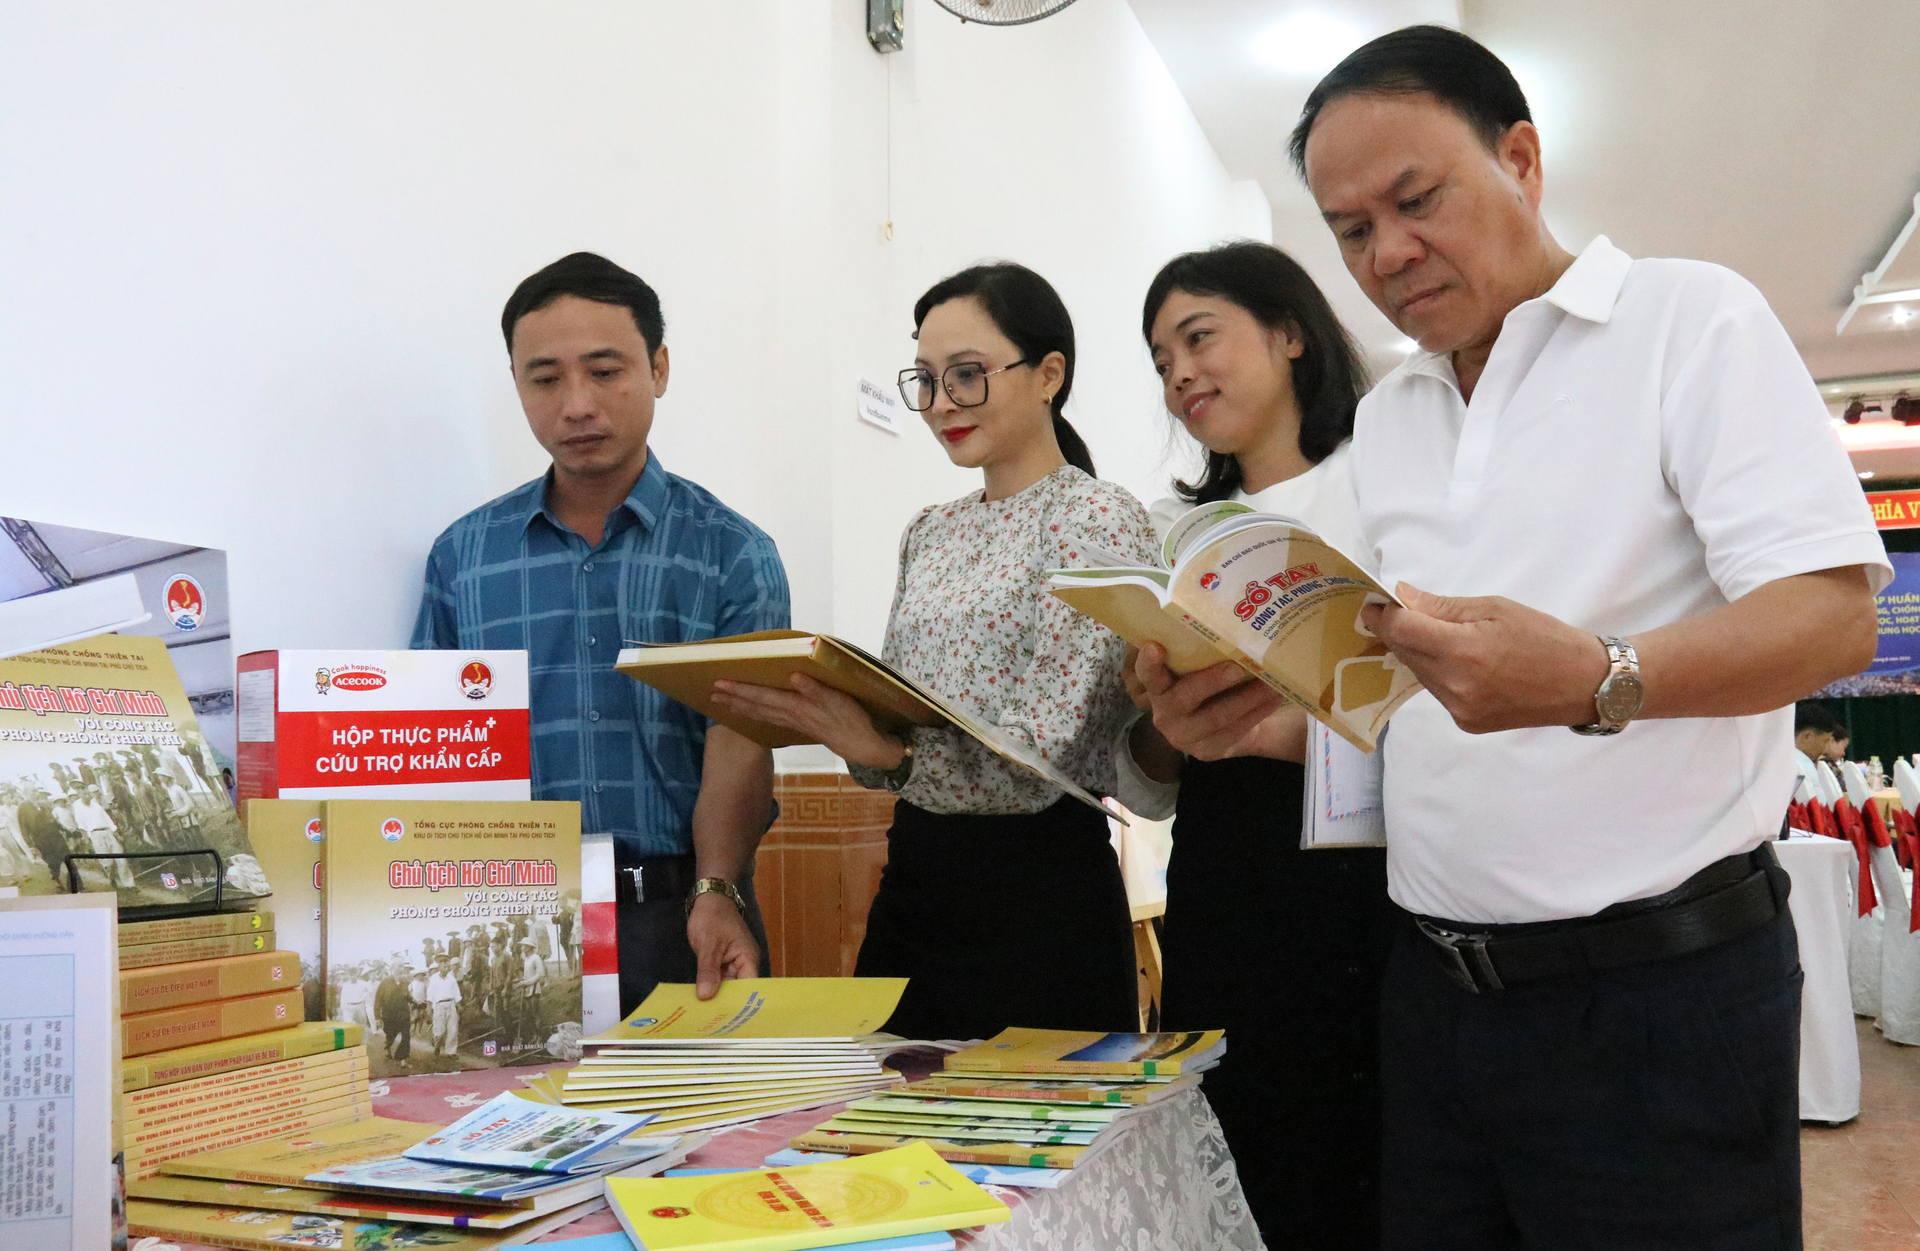 The training aims to guide full-time officials, administrators, and teachers of secondary schools in five Central Highlands provinces to integrate knowledge of disaster prevention and control, environmental protection, and climate change into the program. educational subjects and activities for secondary school students. Photo: Quang Yen.